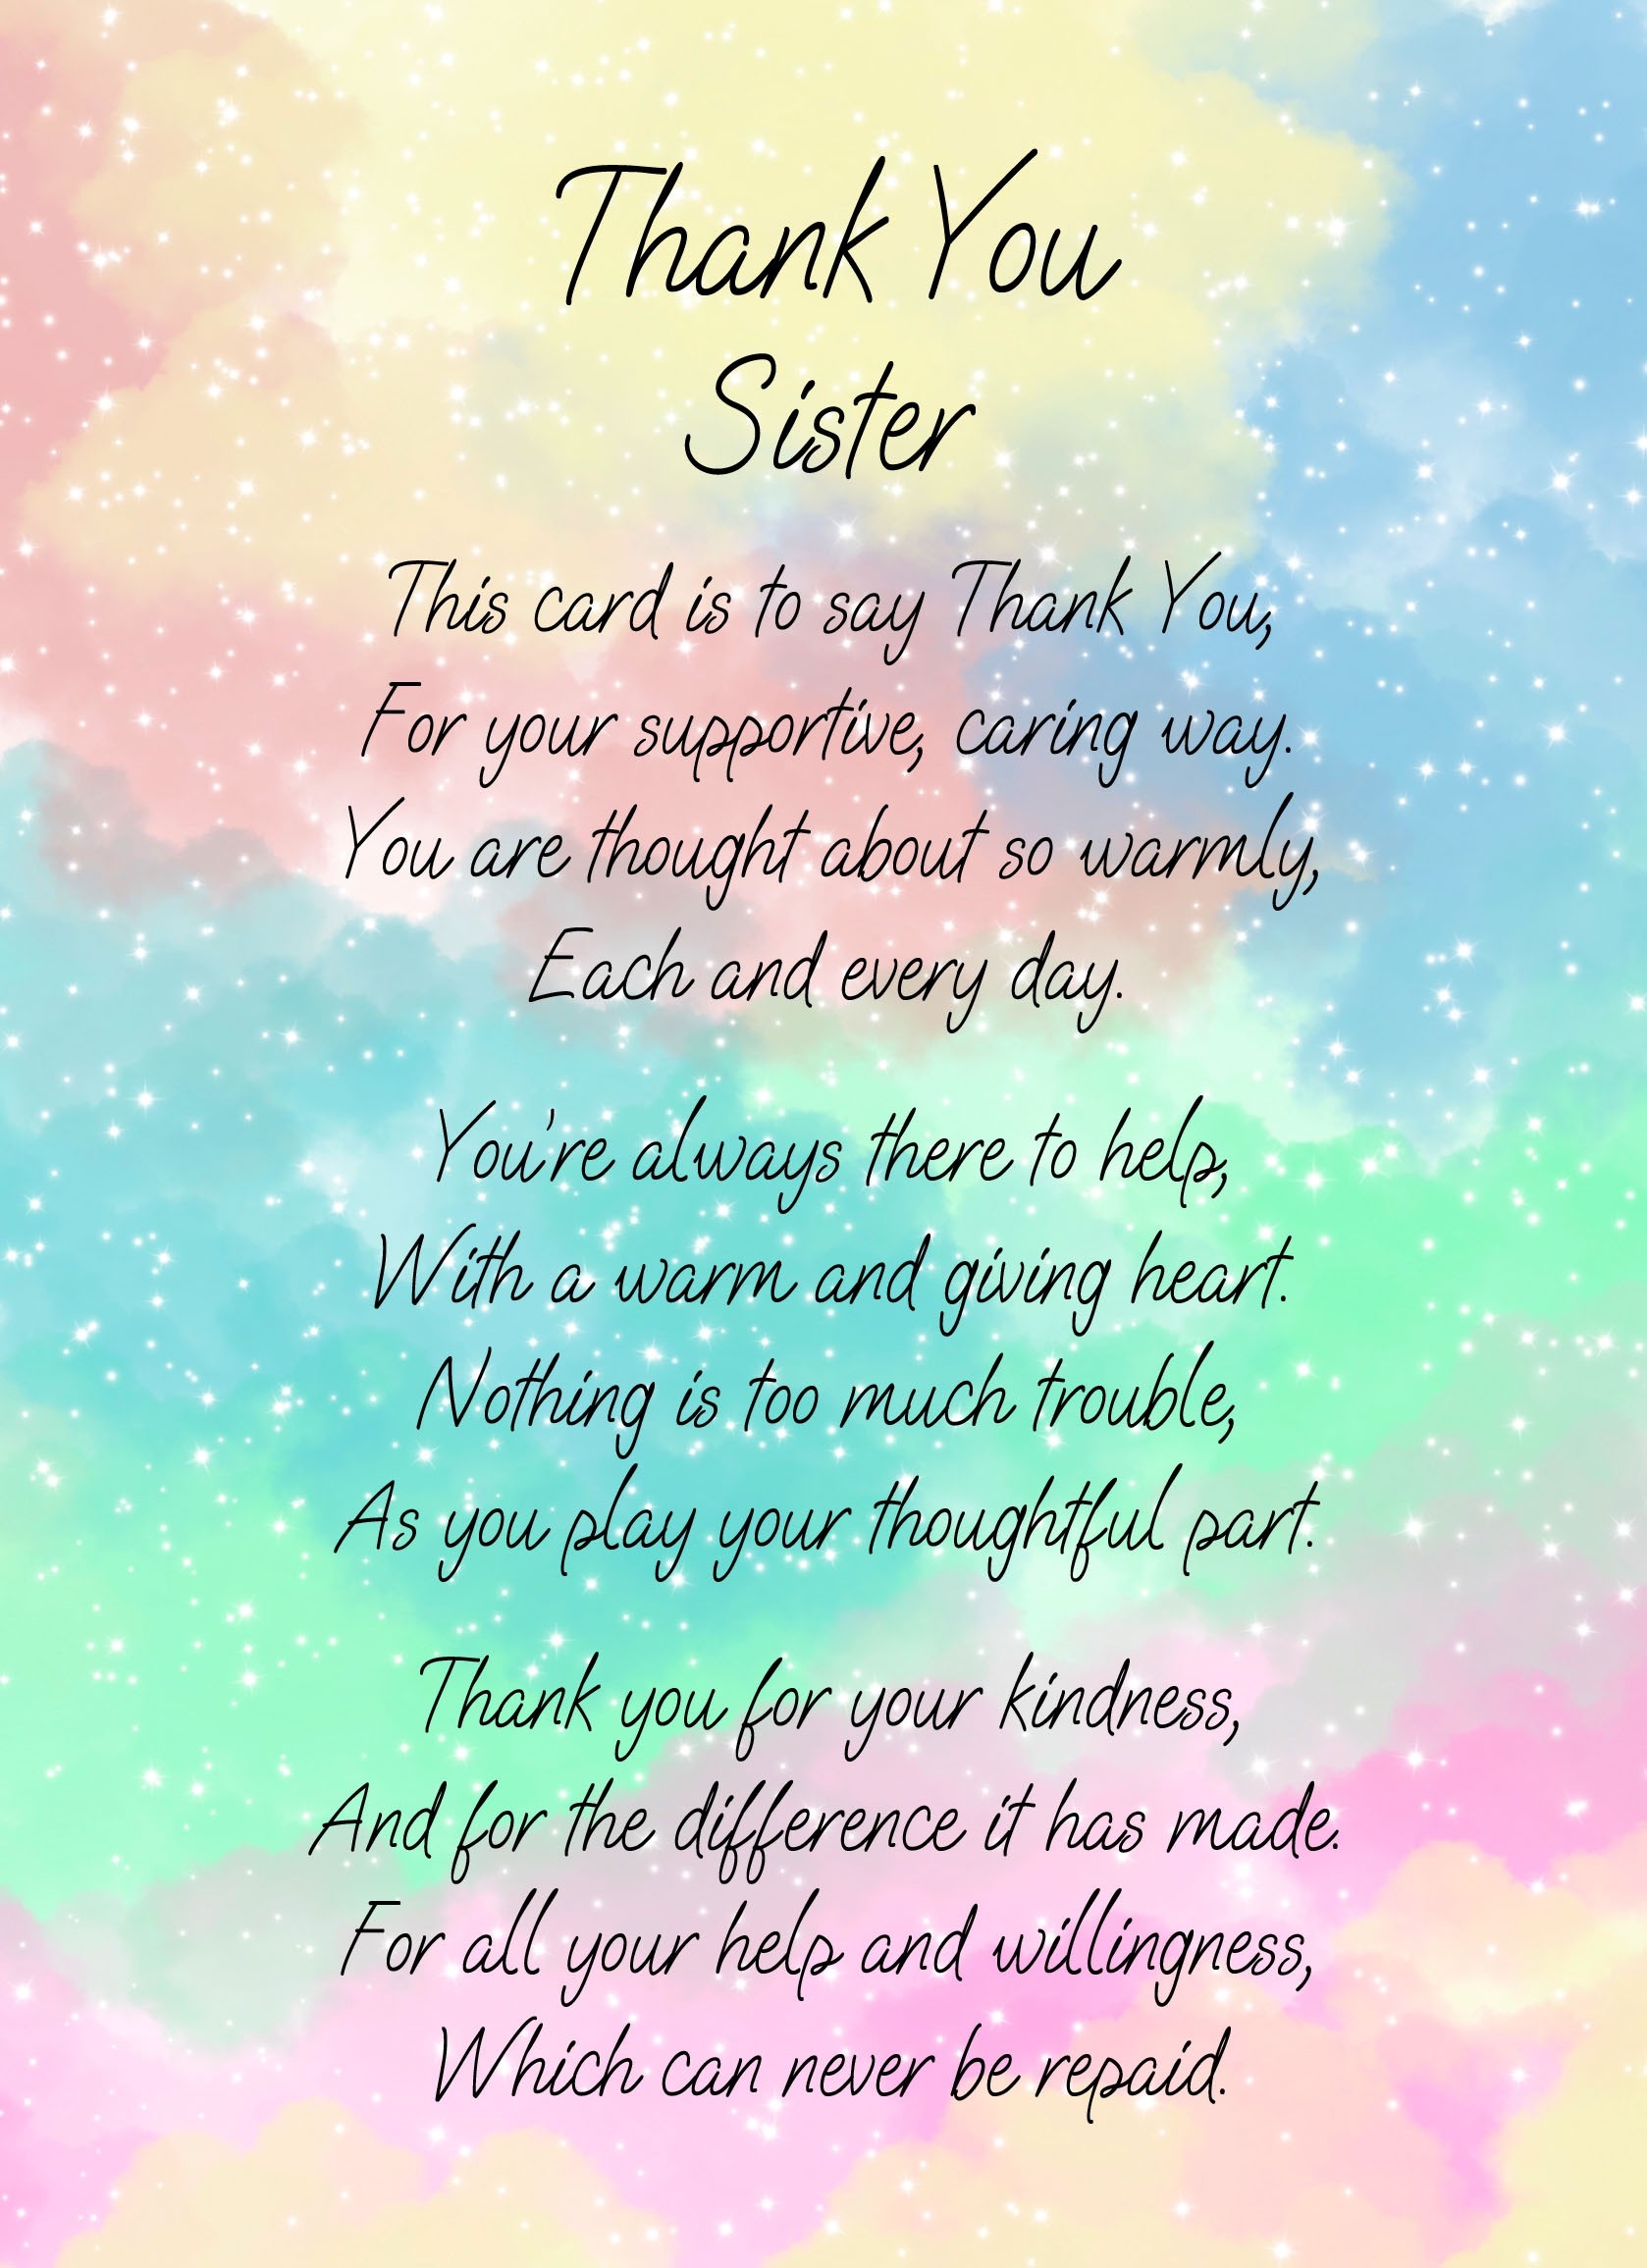 Thank You Poem Verse Card For Sister